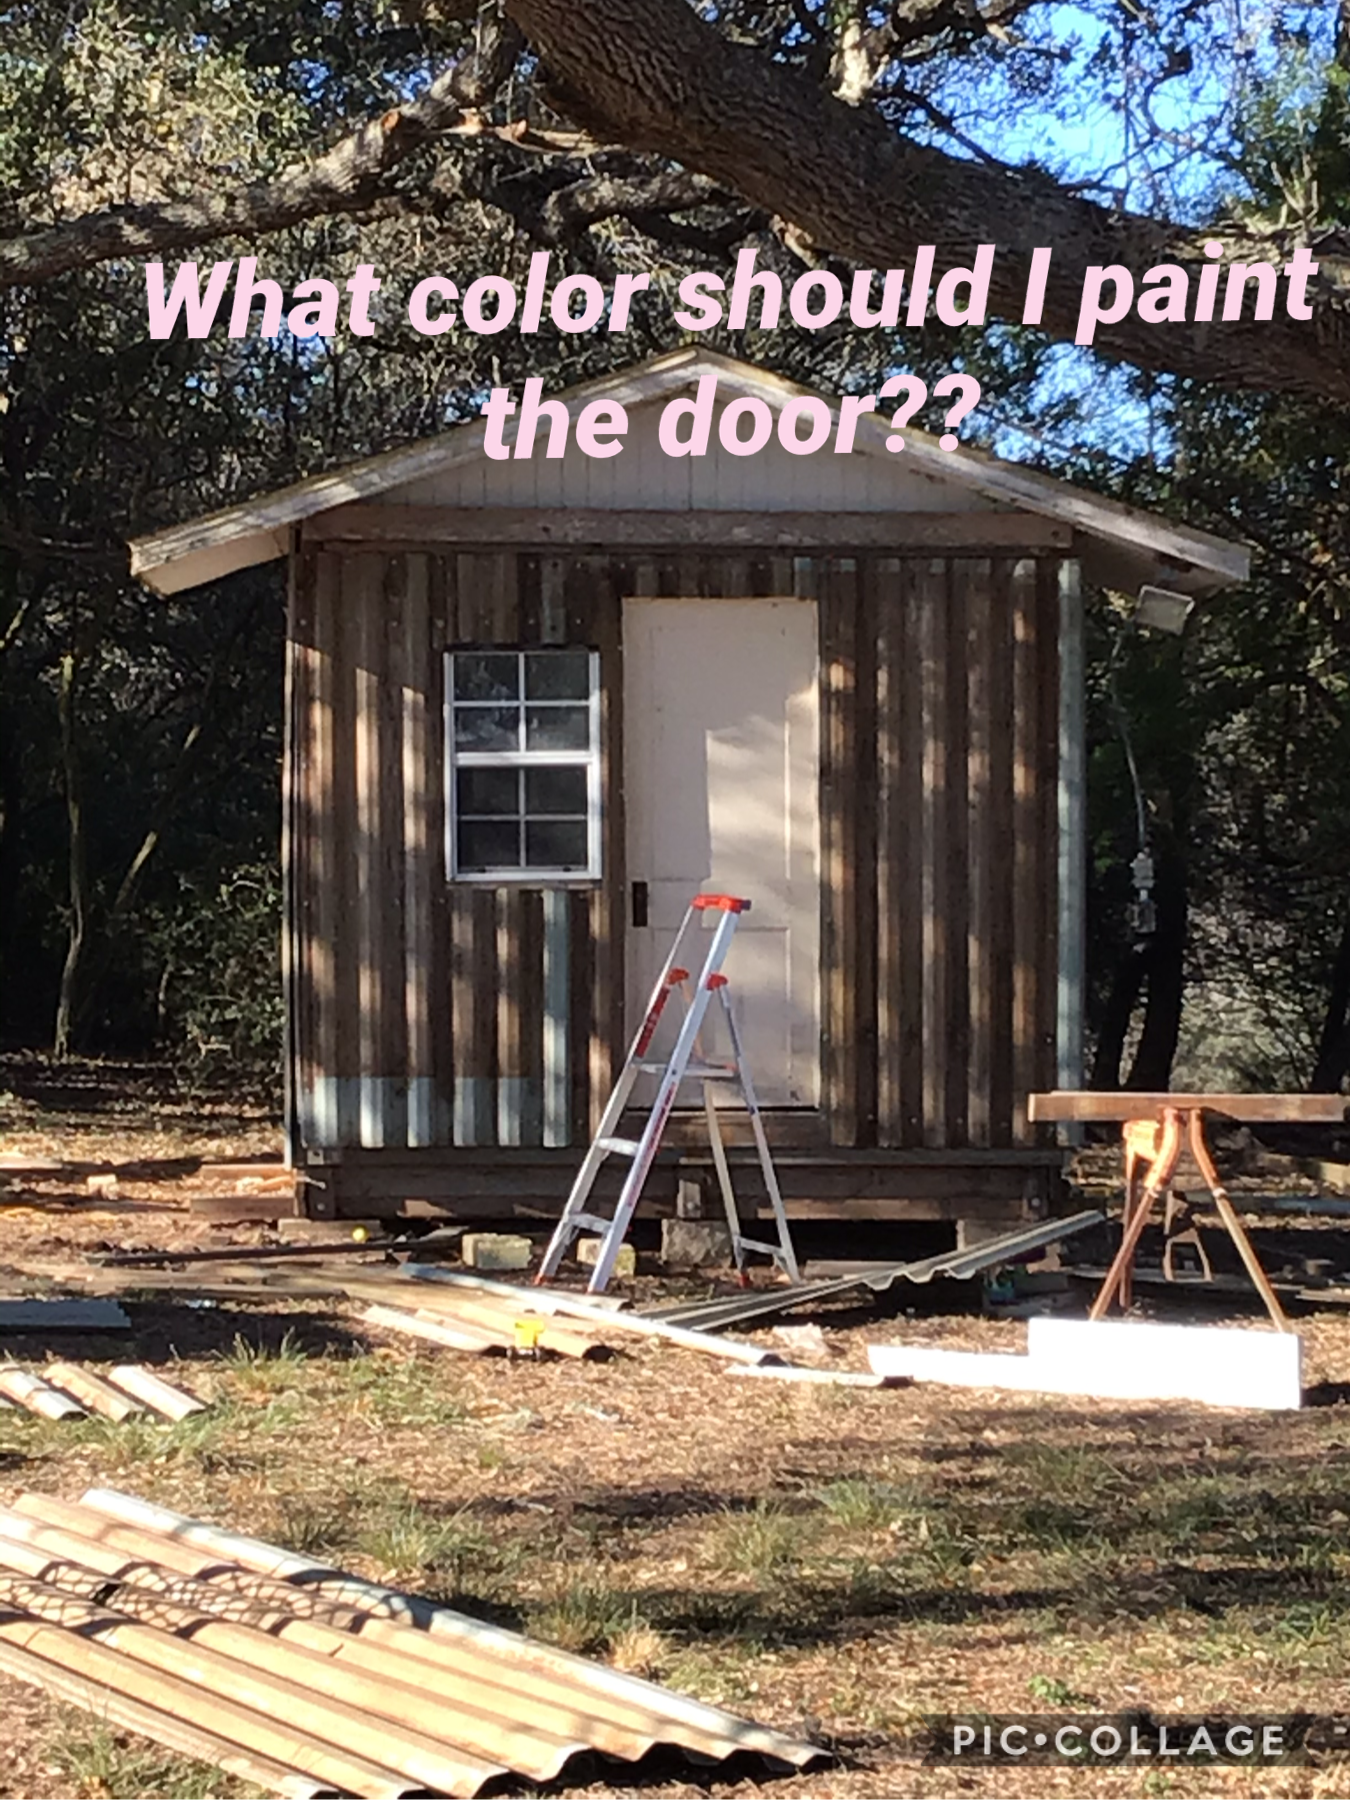 What color should I paint the door?? Answer in comments.